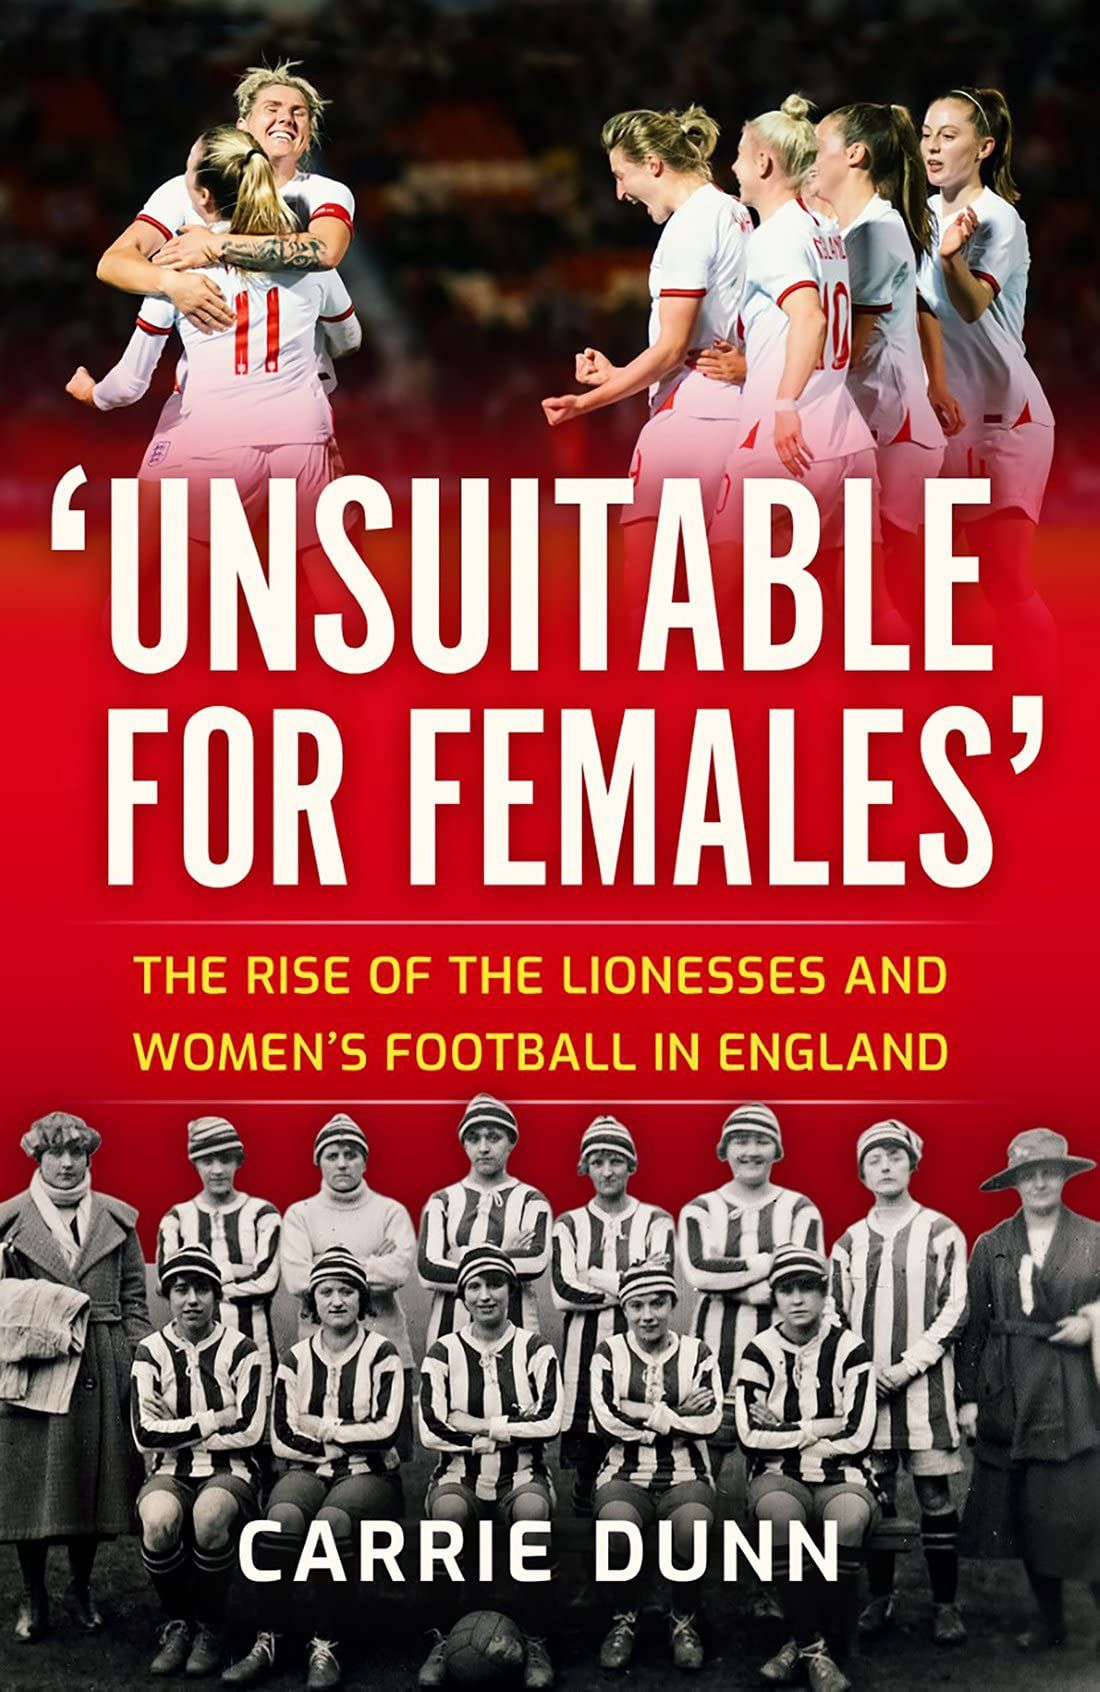 Book cover for Unsuitable for Females - The Rise of the Lionesses and women’s football in England by Carrie Dunn